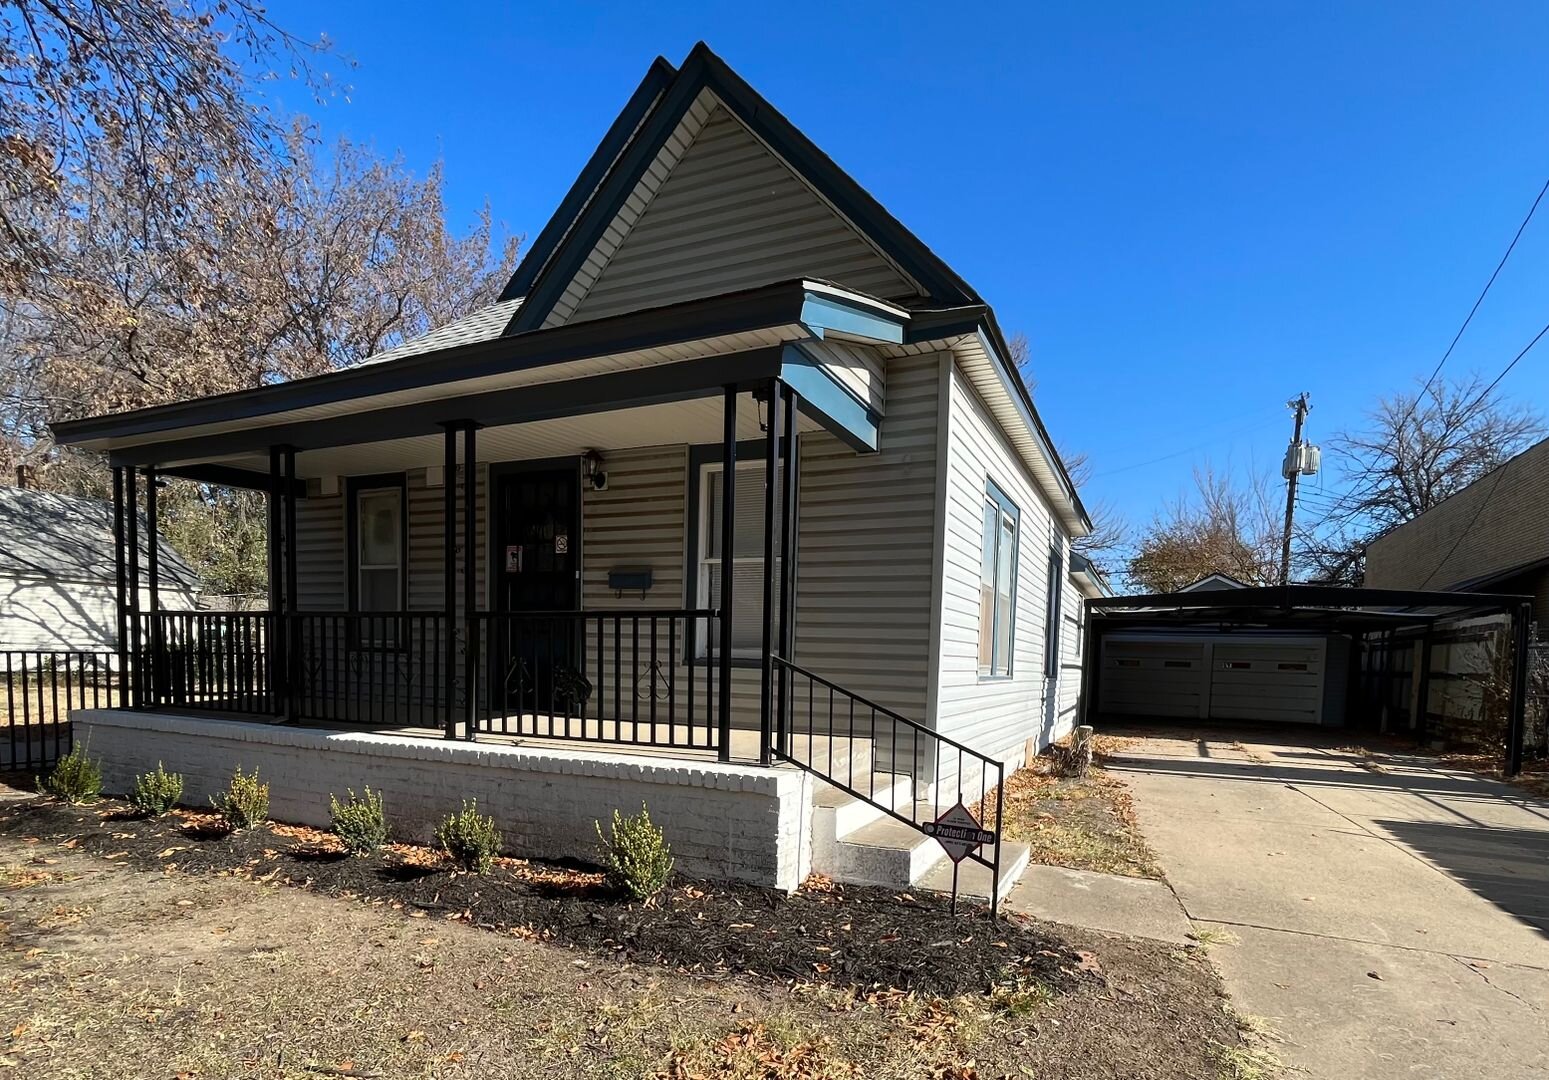 Investment property for Wichita